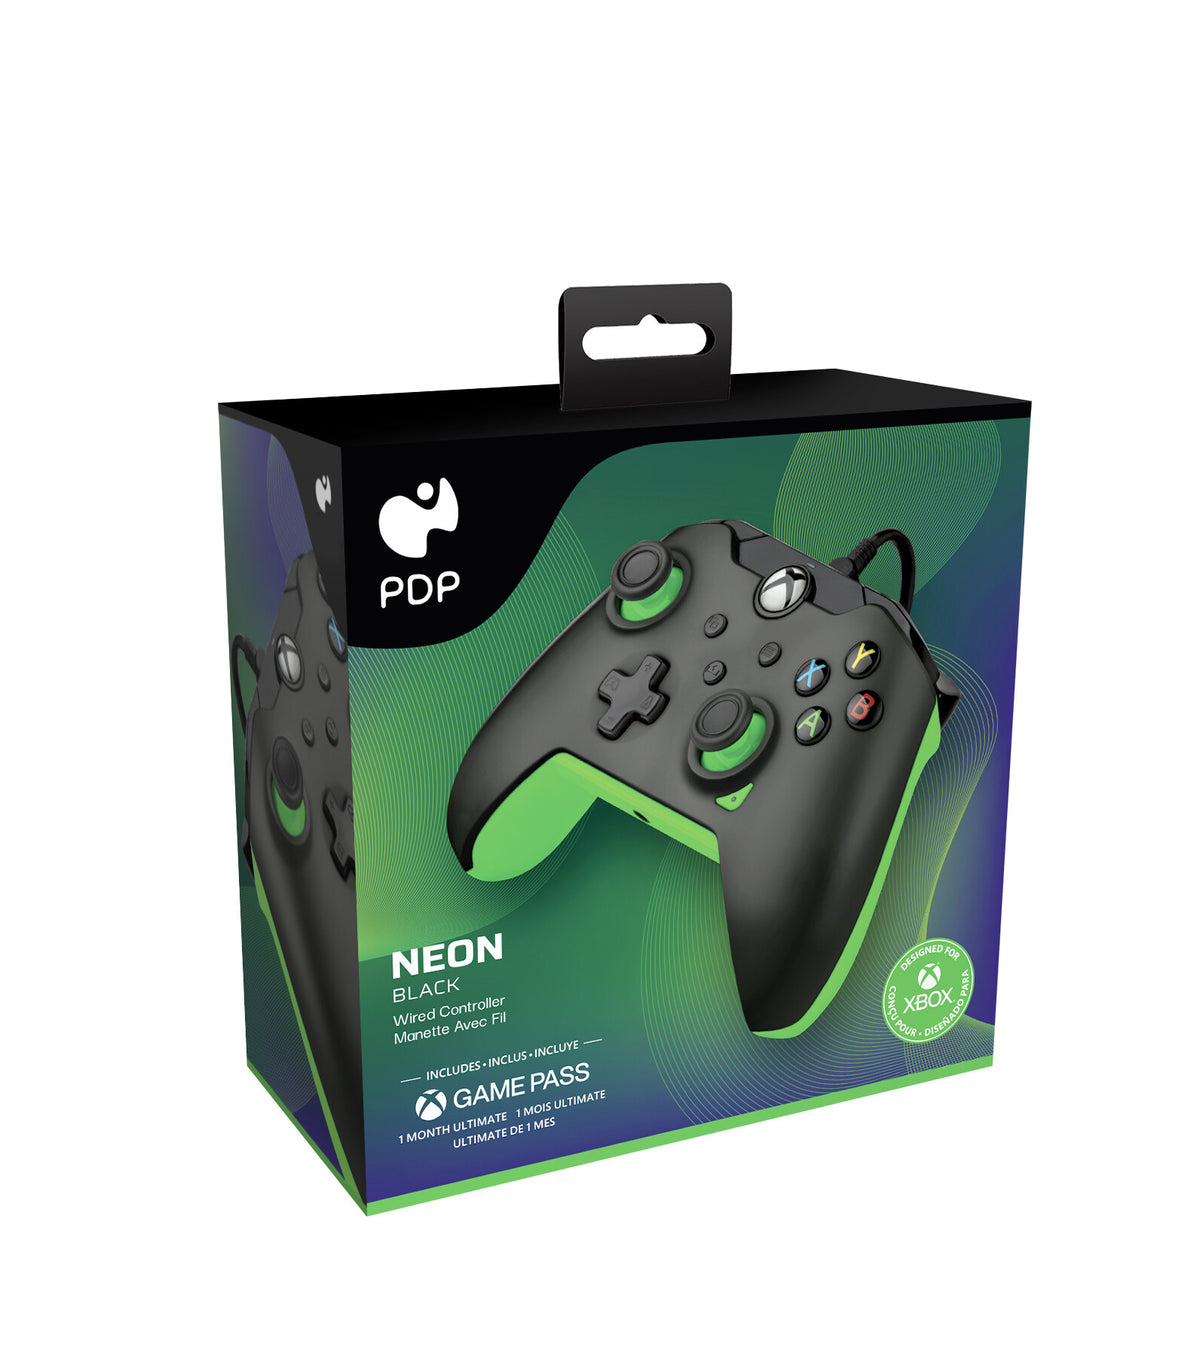 PDP - Wired Controller for PC / Xbox Series X|S in Neon Black